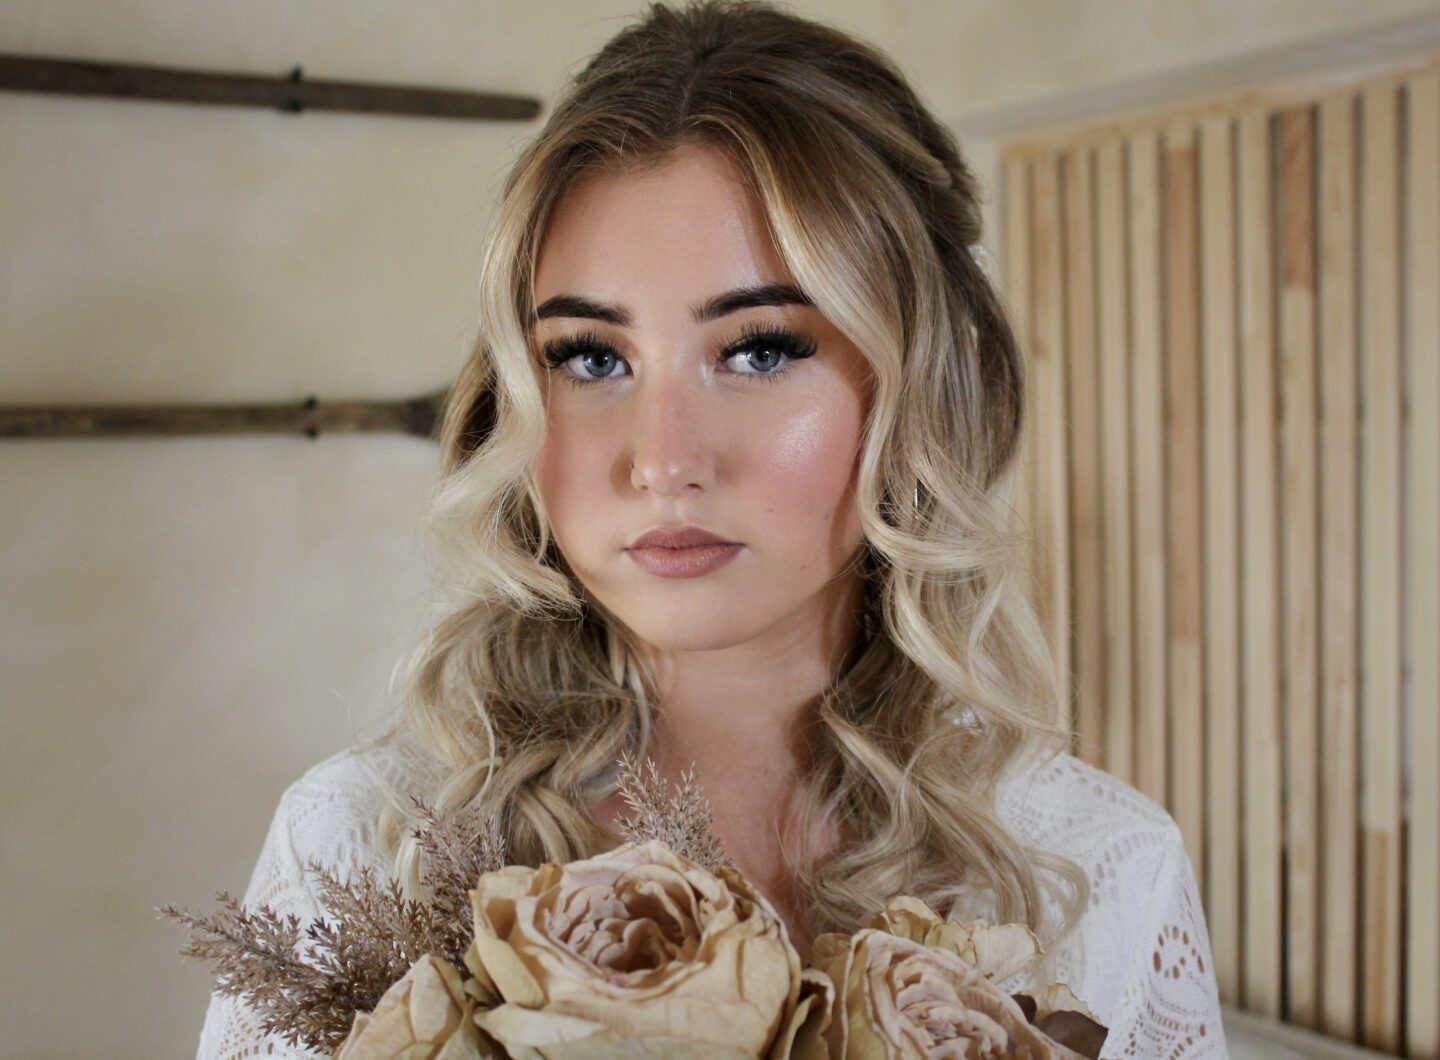 Bridal Makeup Tips: How To Get On Trend Glowy Skin For Your Wedding Day